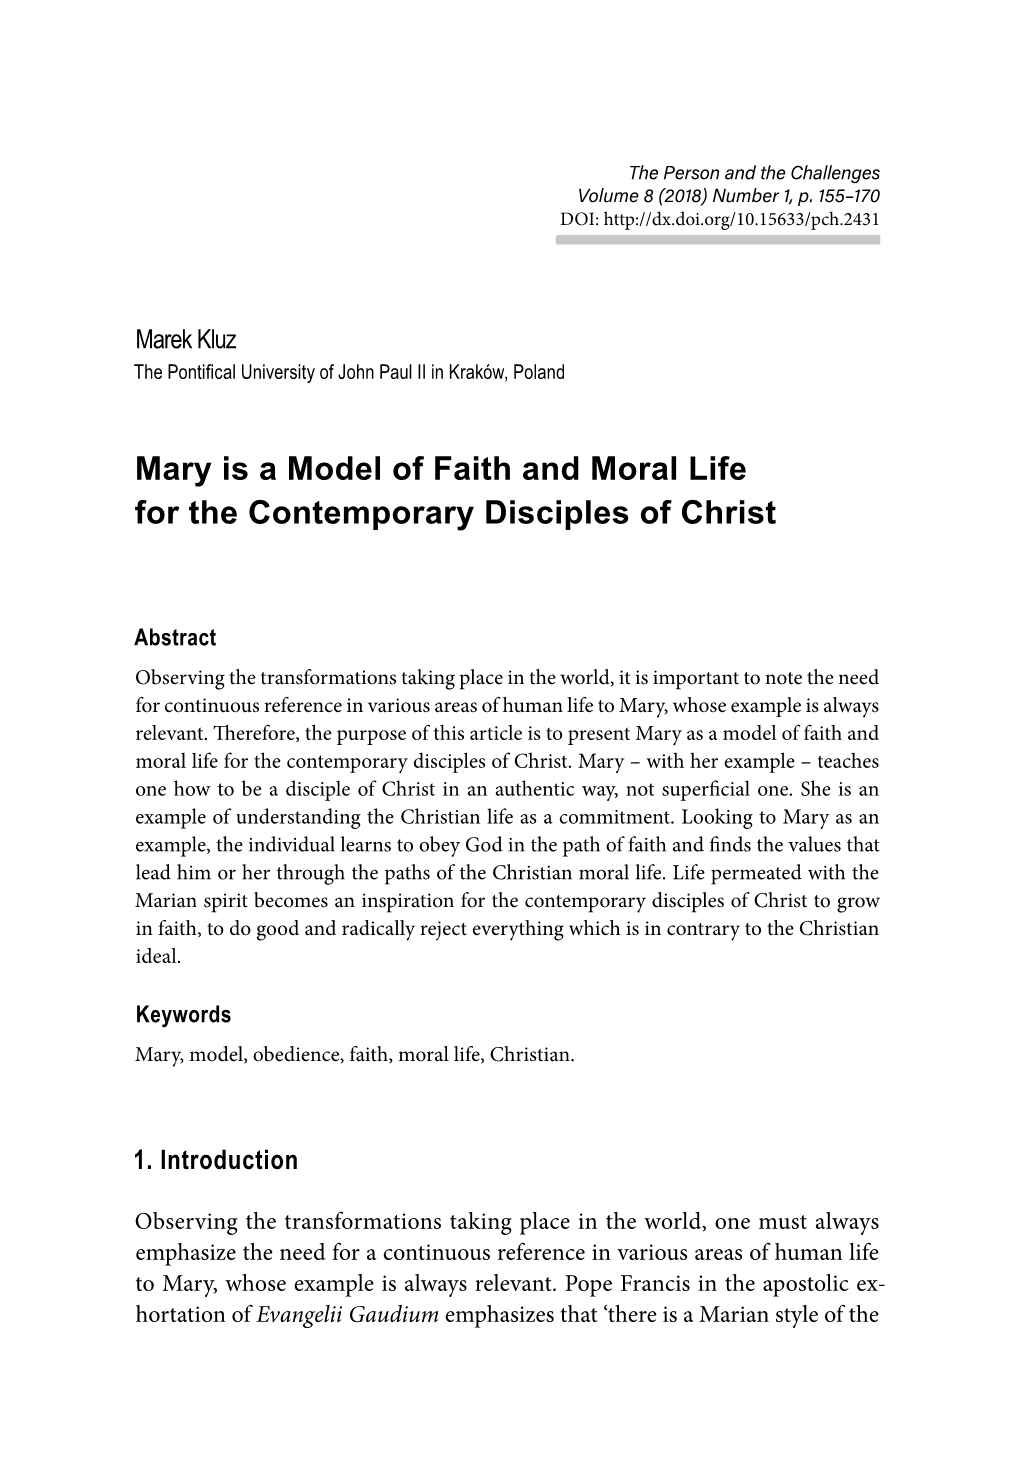 Mary Is a Model of Faith and Moral Life for the Contemporary Disciples of Christ